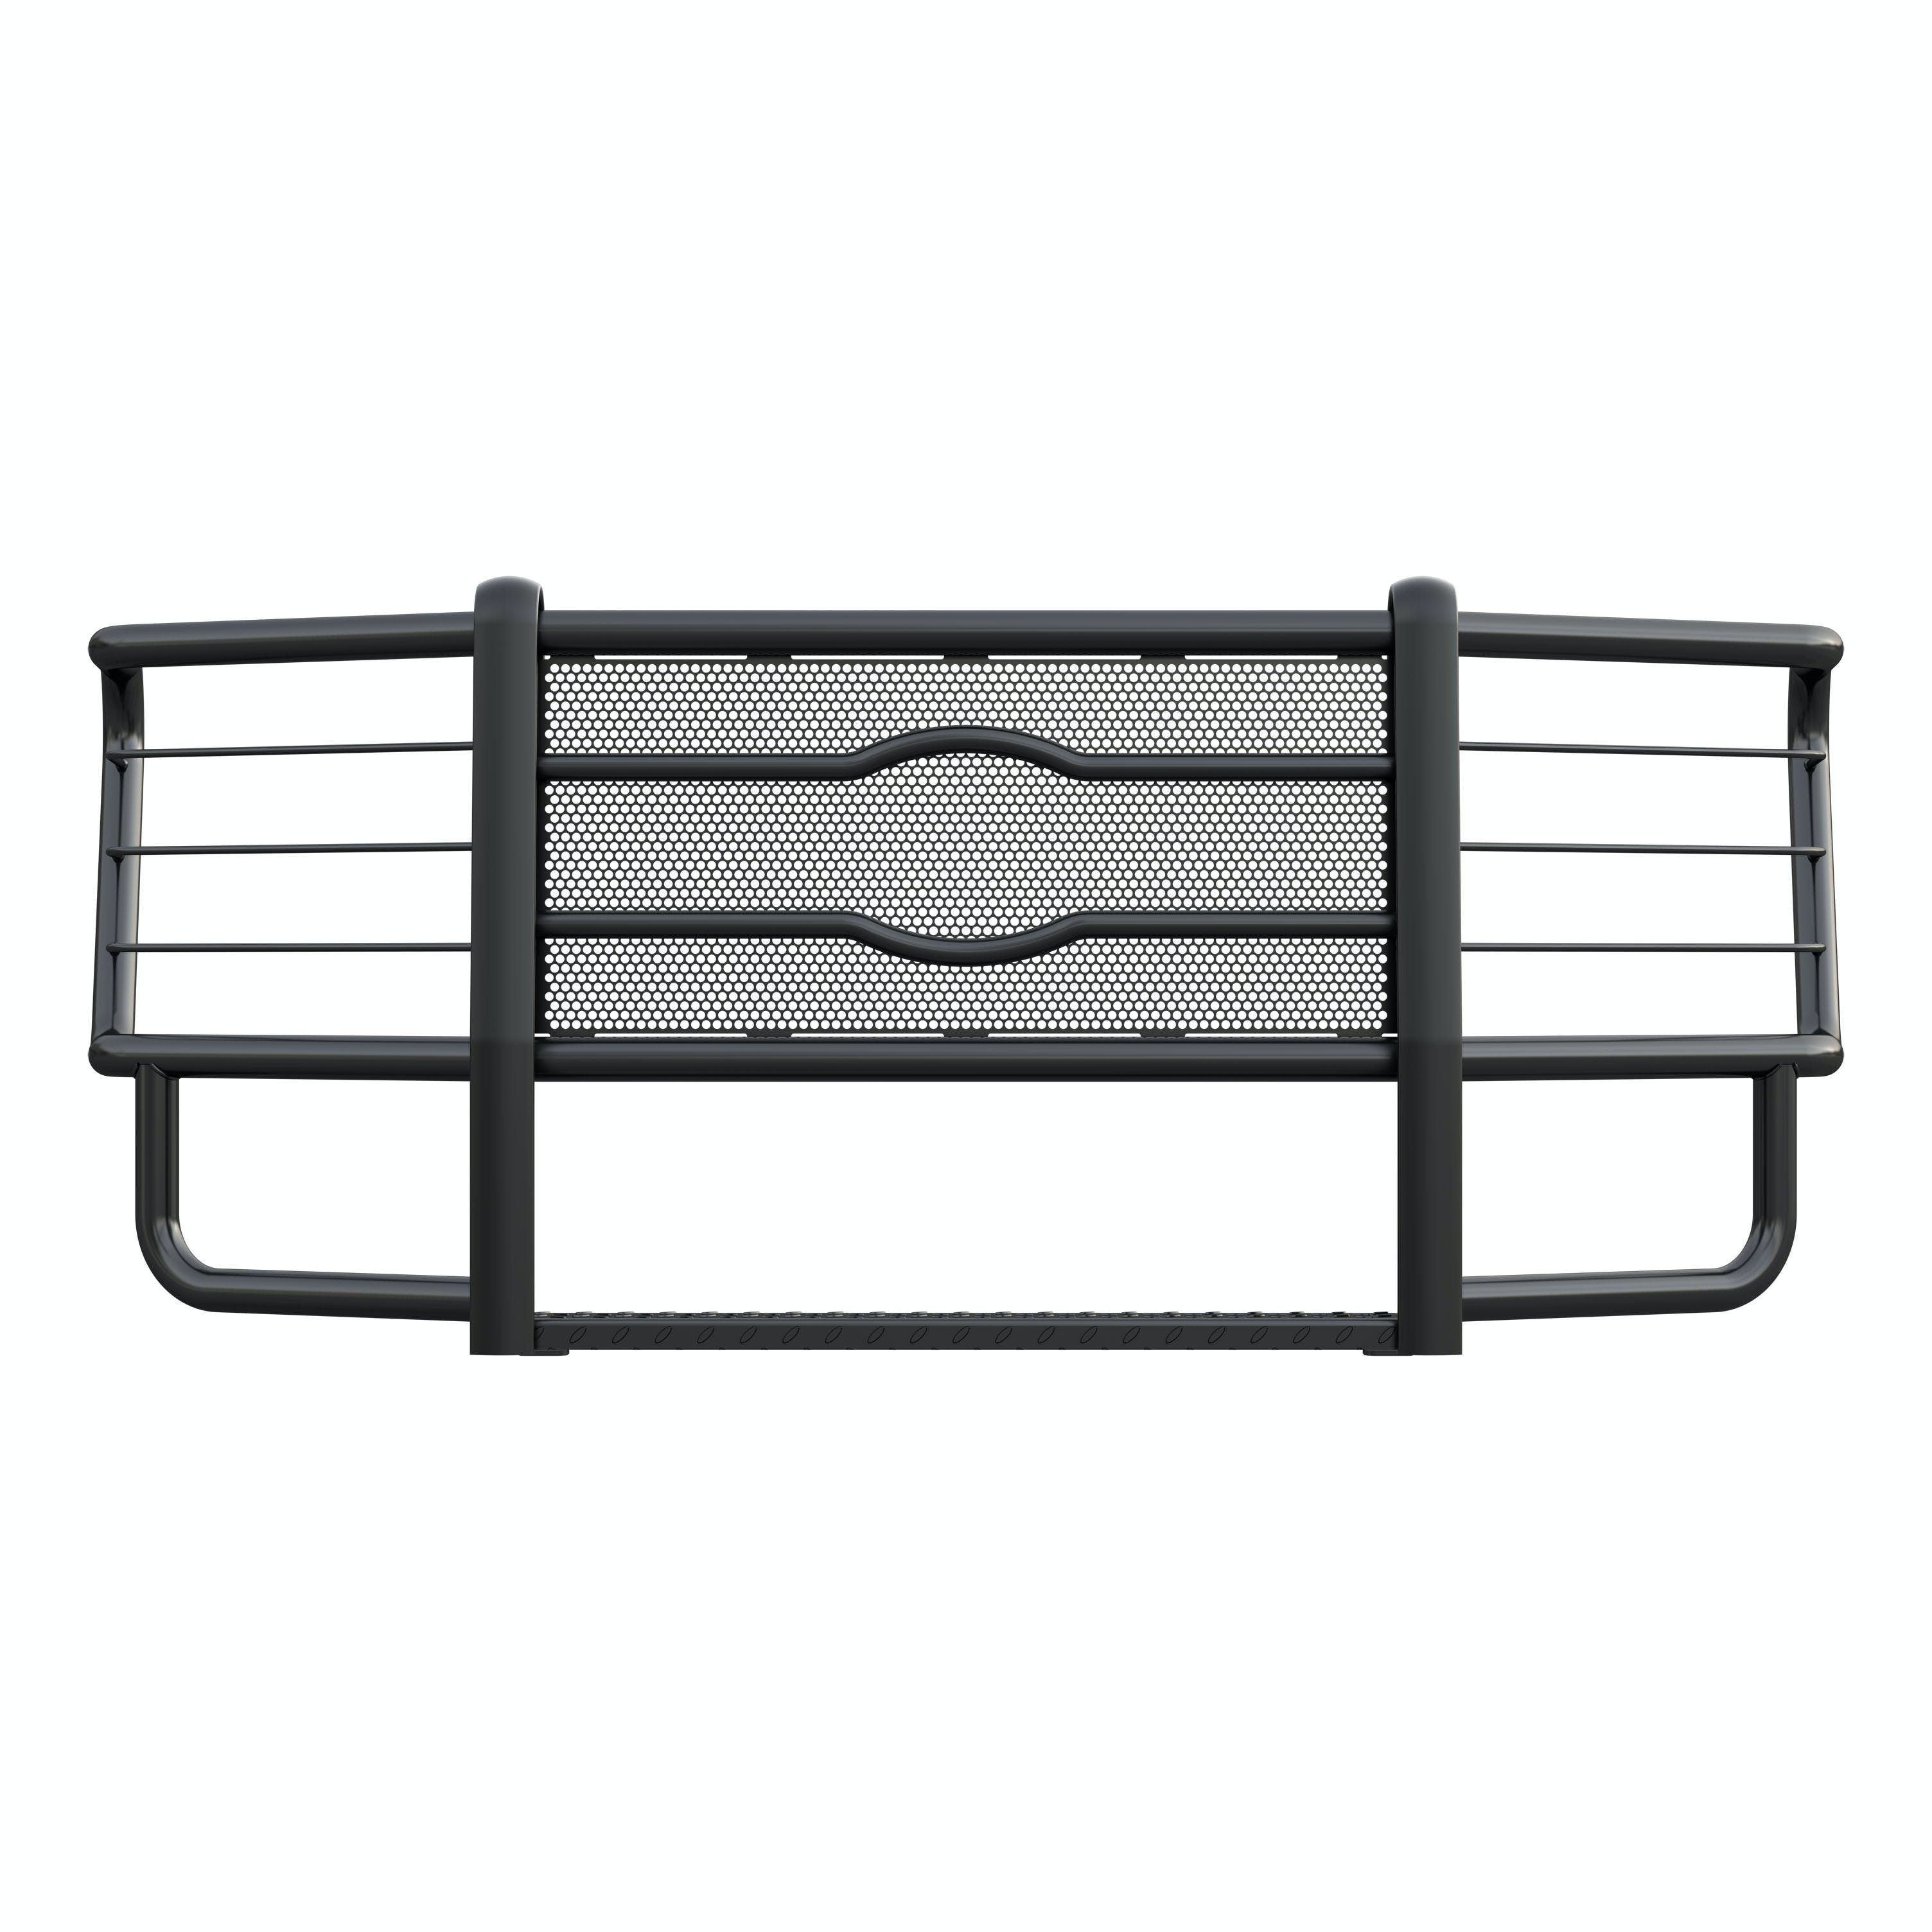 LUVERNE 321723-321722 Prowler Max Grille Guard